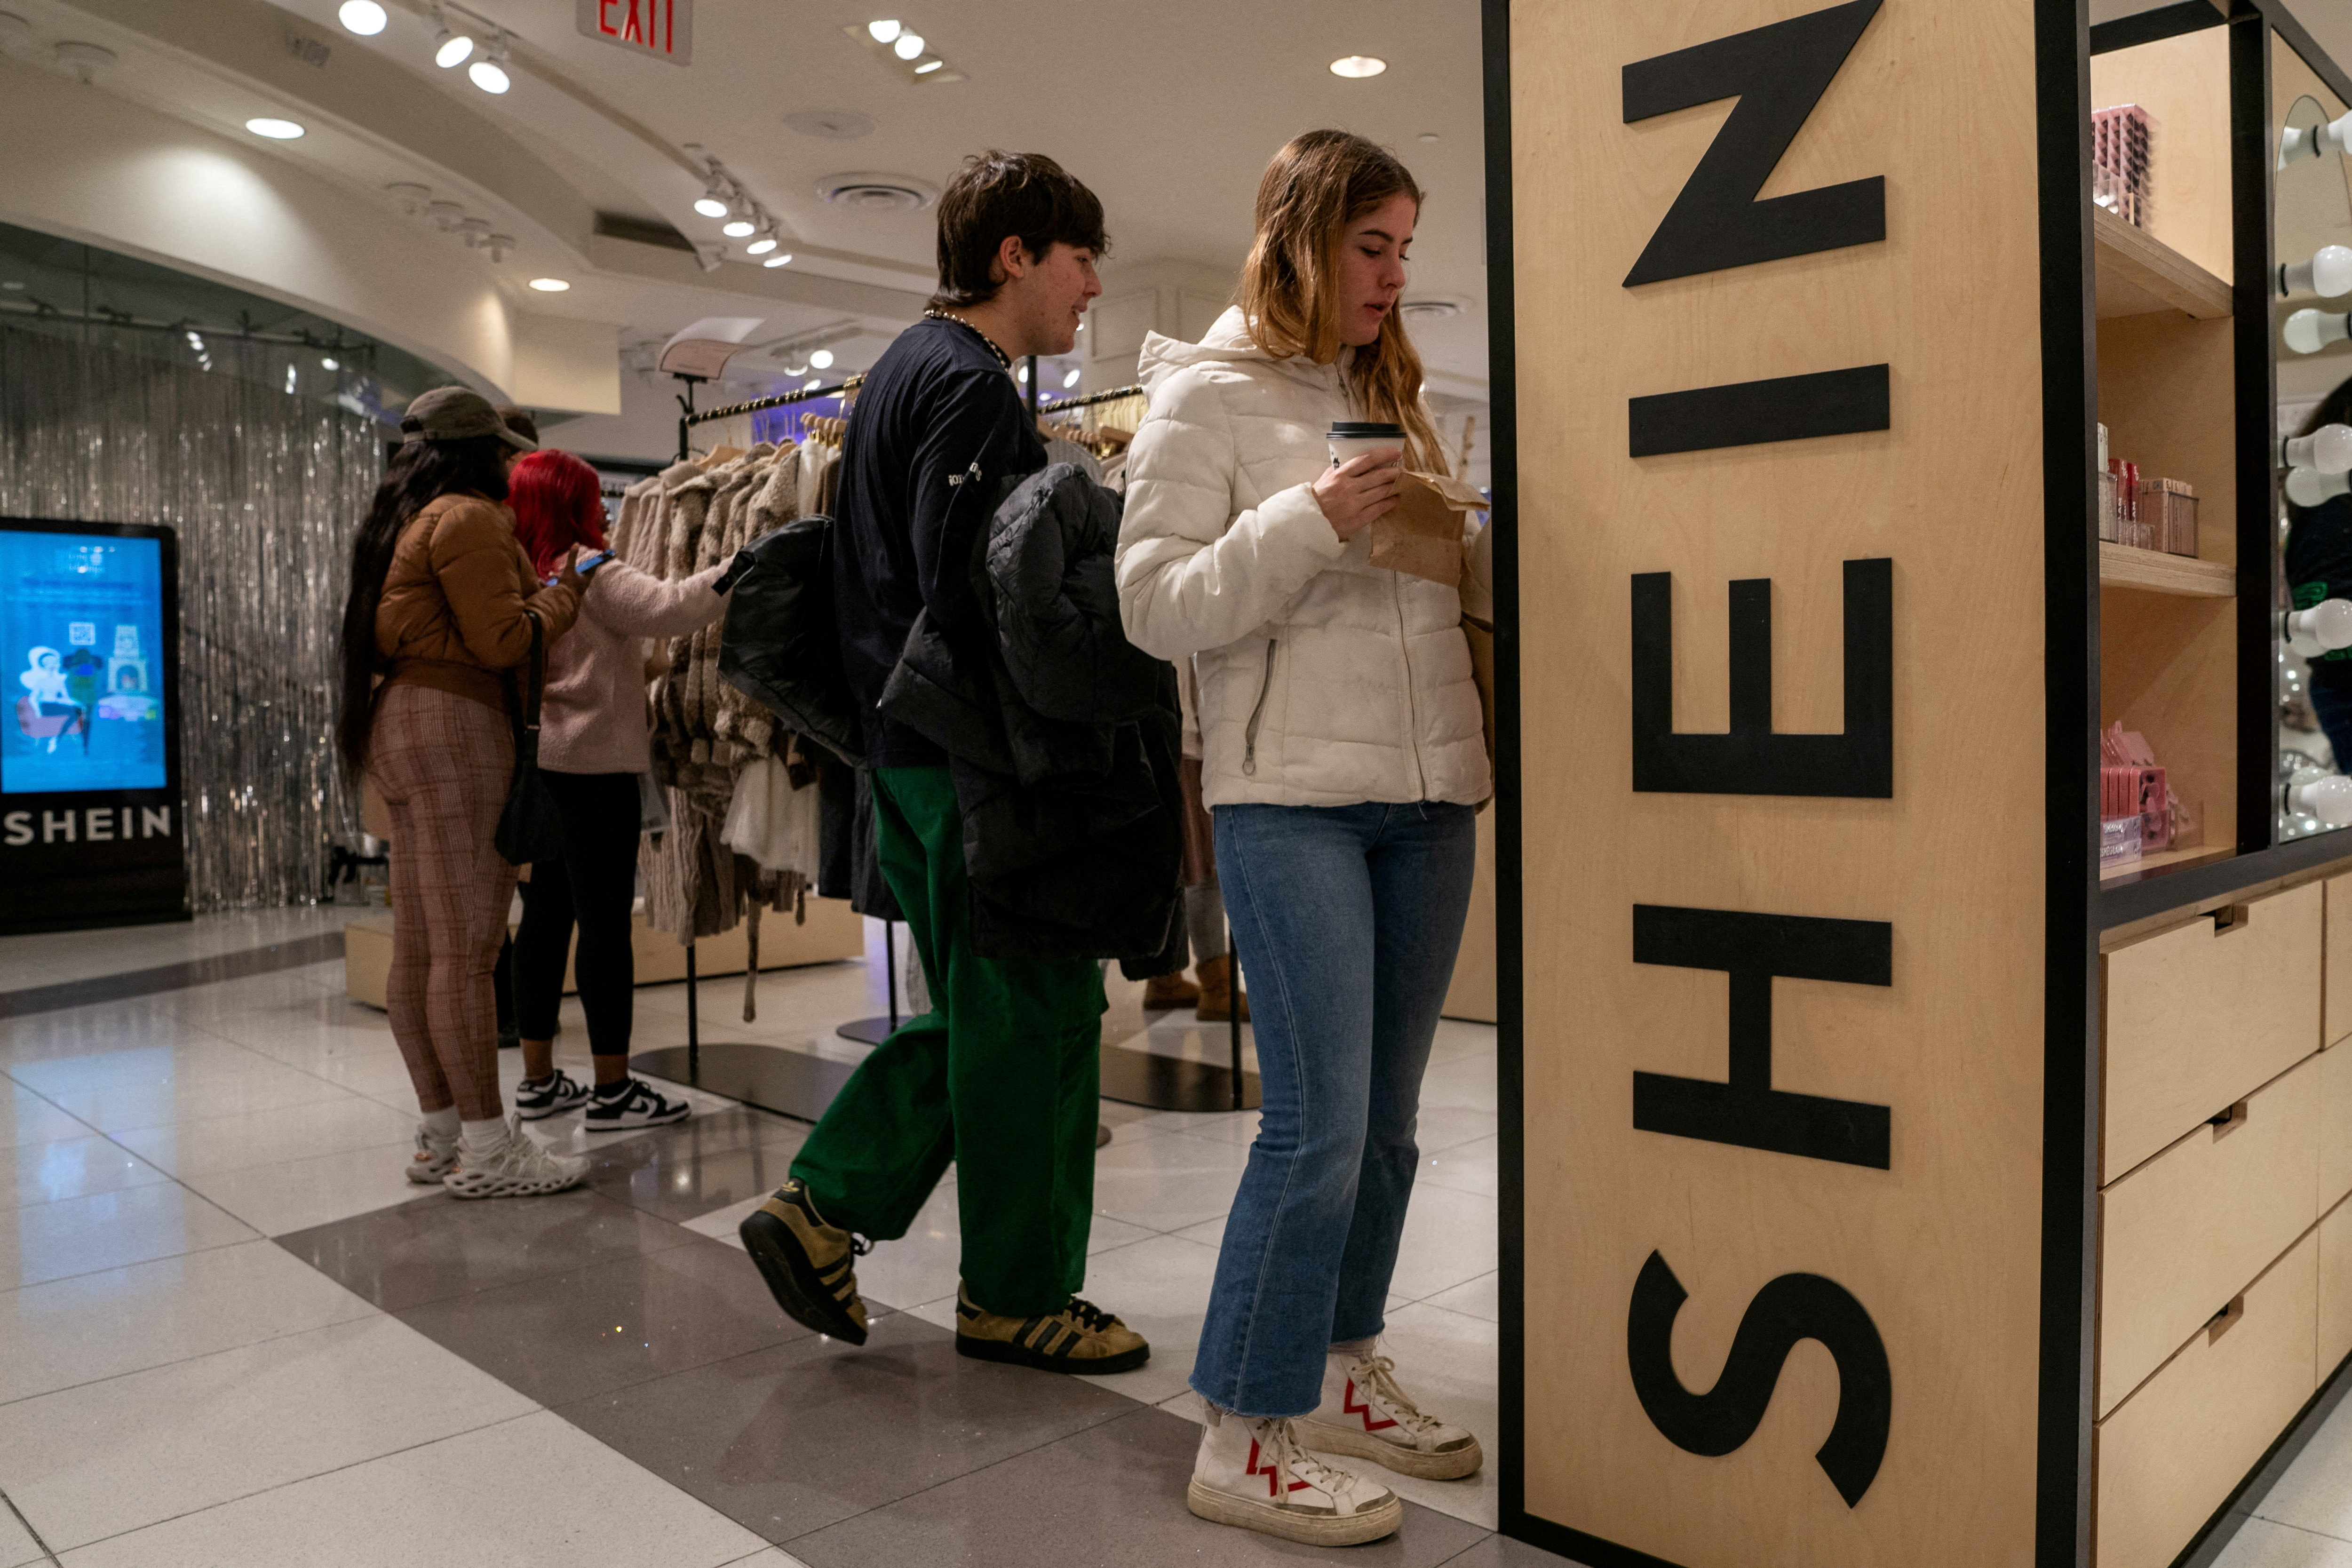 Shein IPO raises fresh questions on alleged forced labor in supply